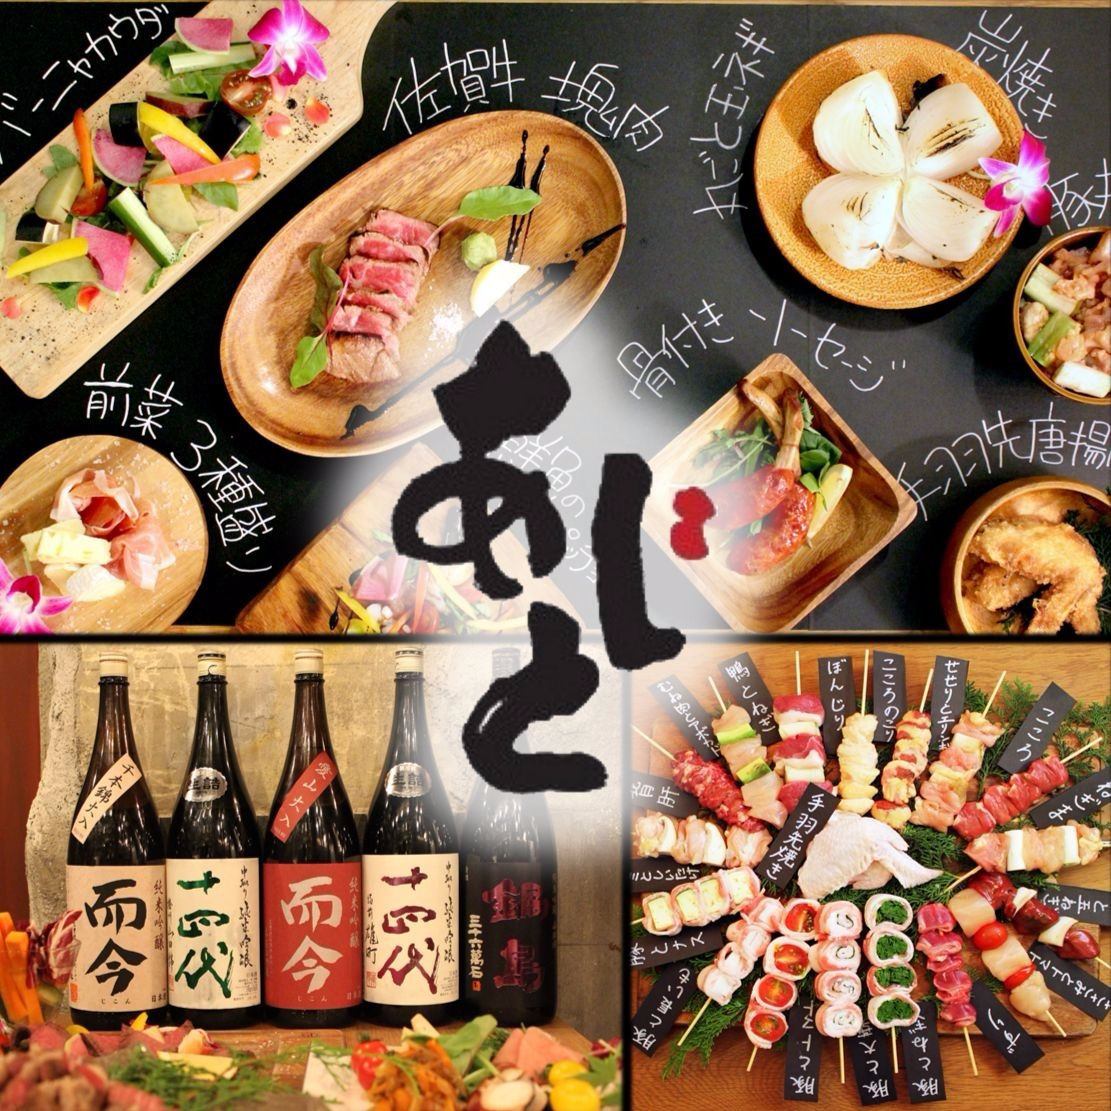 Charcoal bar in Umeda Higashi-dori [Welcome for lunch] All-you-can-drink including 100 kinds of carefully selected local sake for 980 yen for 60 minutes★